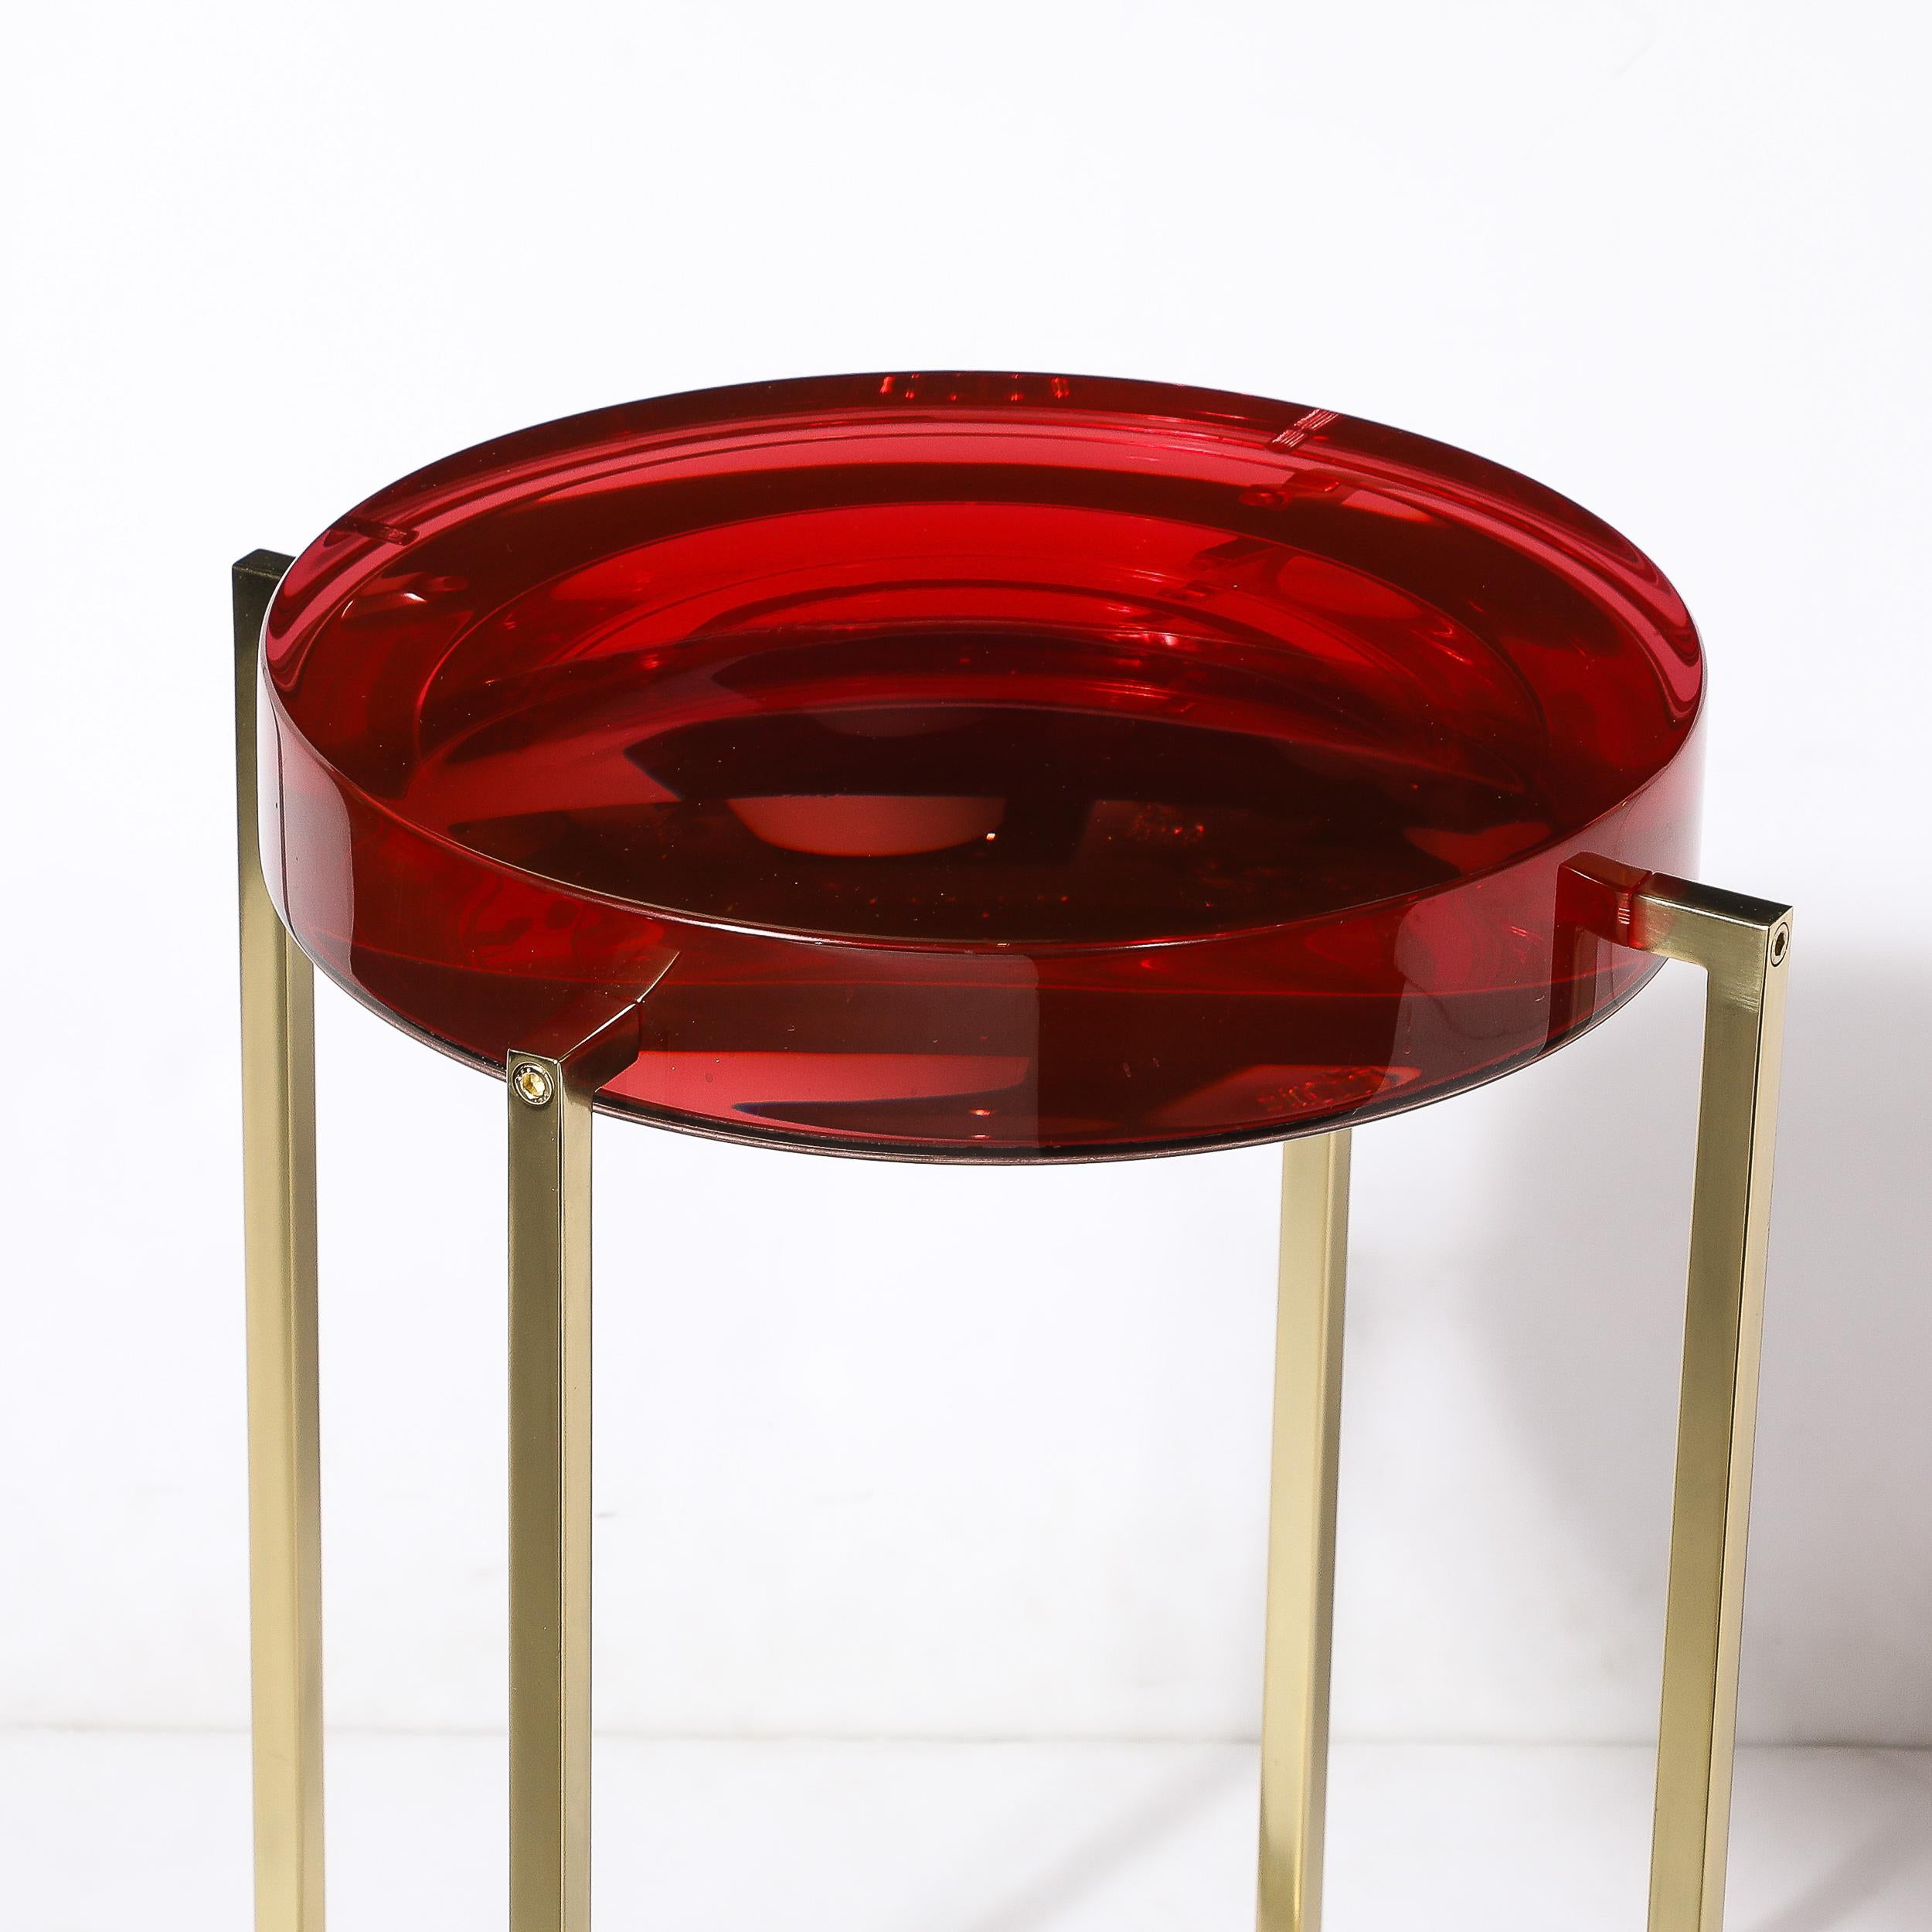 This playful and sleek Modernist Lens Side Table in Ruby Lucite and Brass is by McCollin Bryan and originates from England during the latter half of the 20th Century. Features a rectilinear brass framework that intersects in the center beneath the